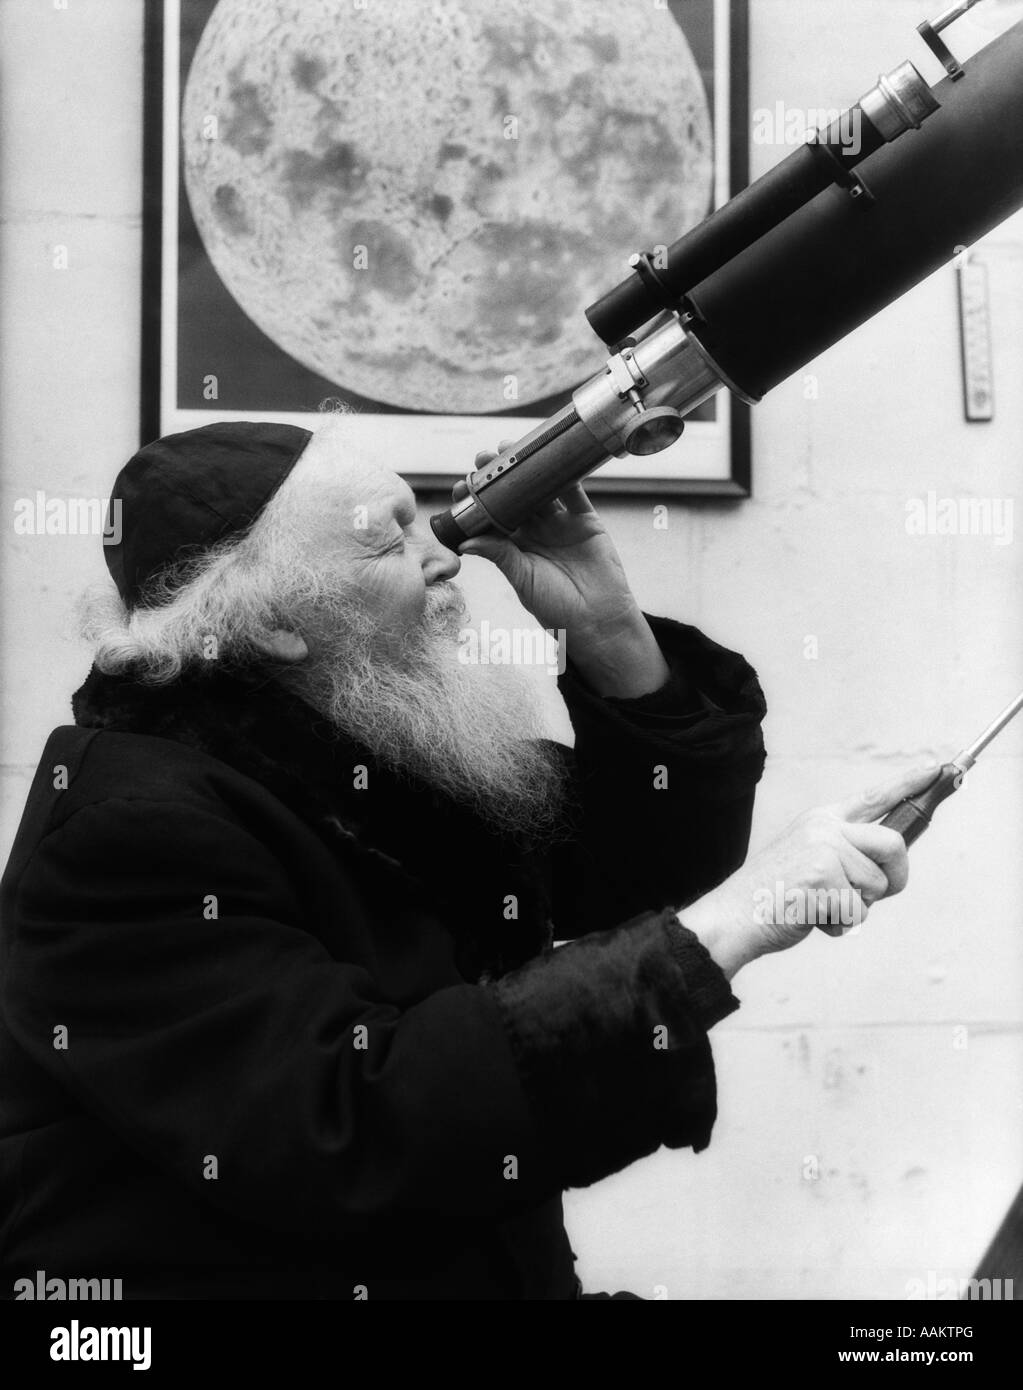 1930s OLD ASTRONOMER WHITE HAIR AND BEARD WEARING SKULL CAP LOOKING THROUGH TELESCOPE Stock Photo